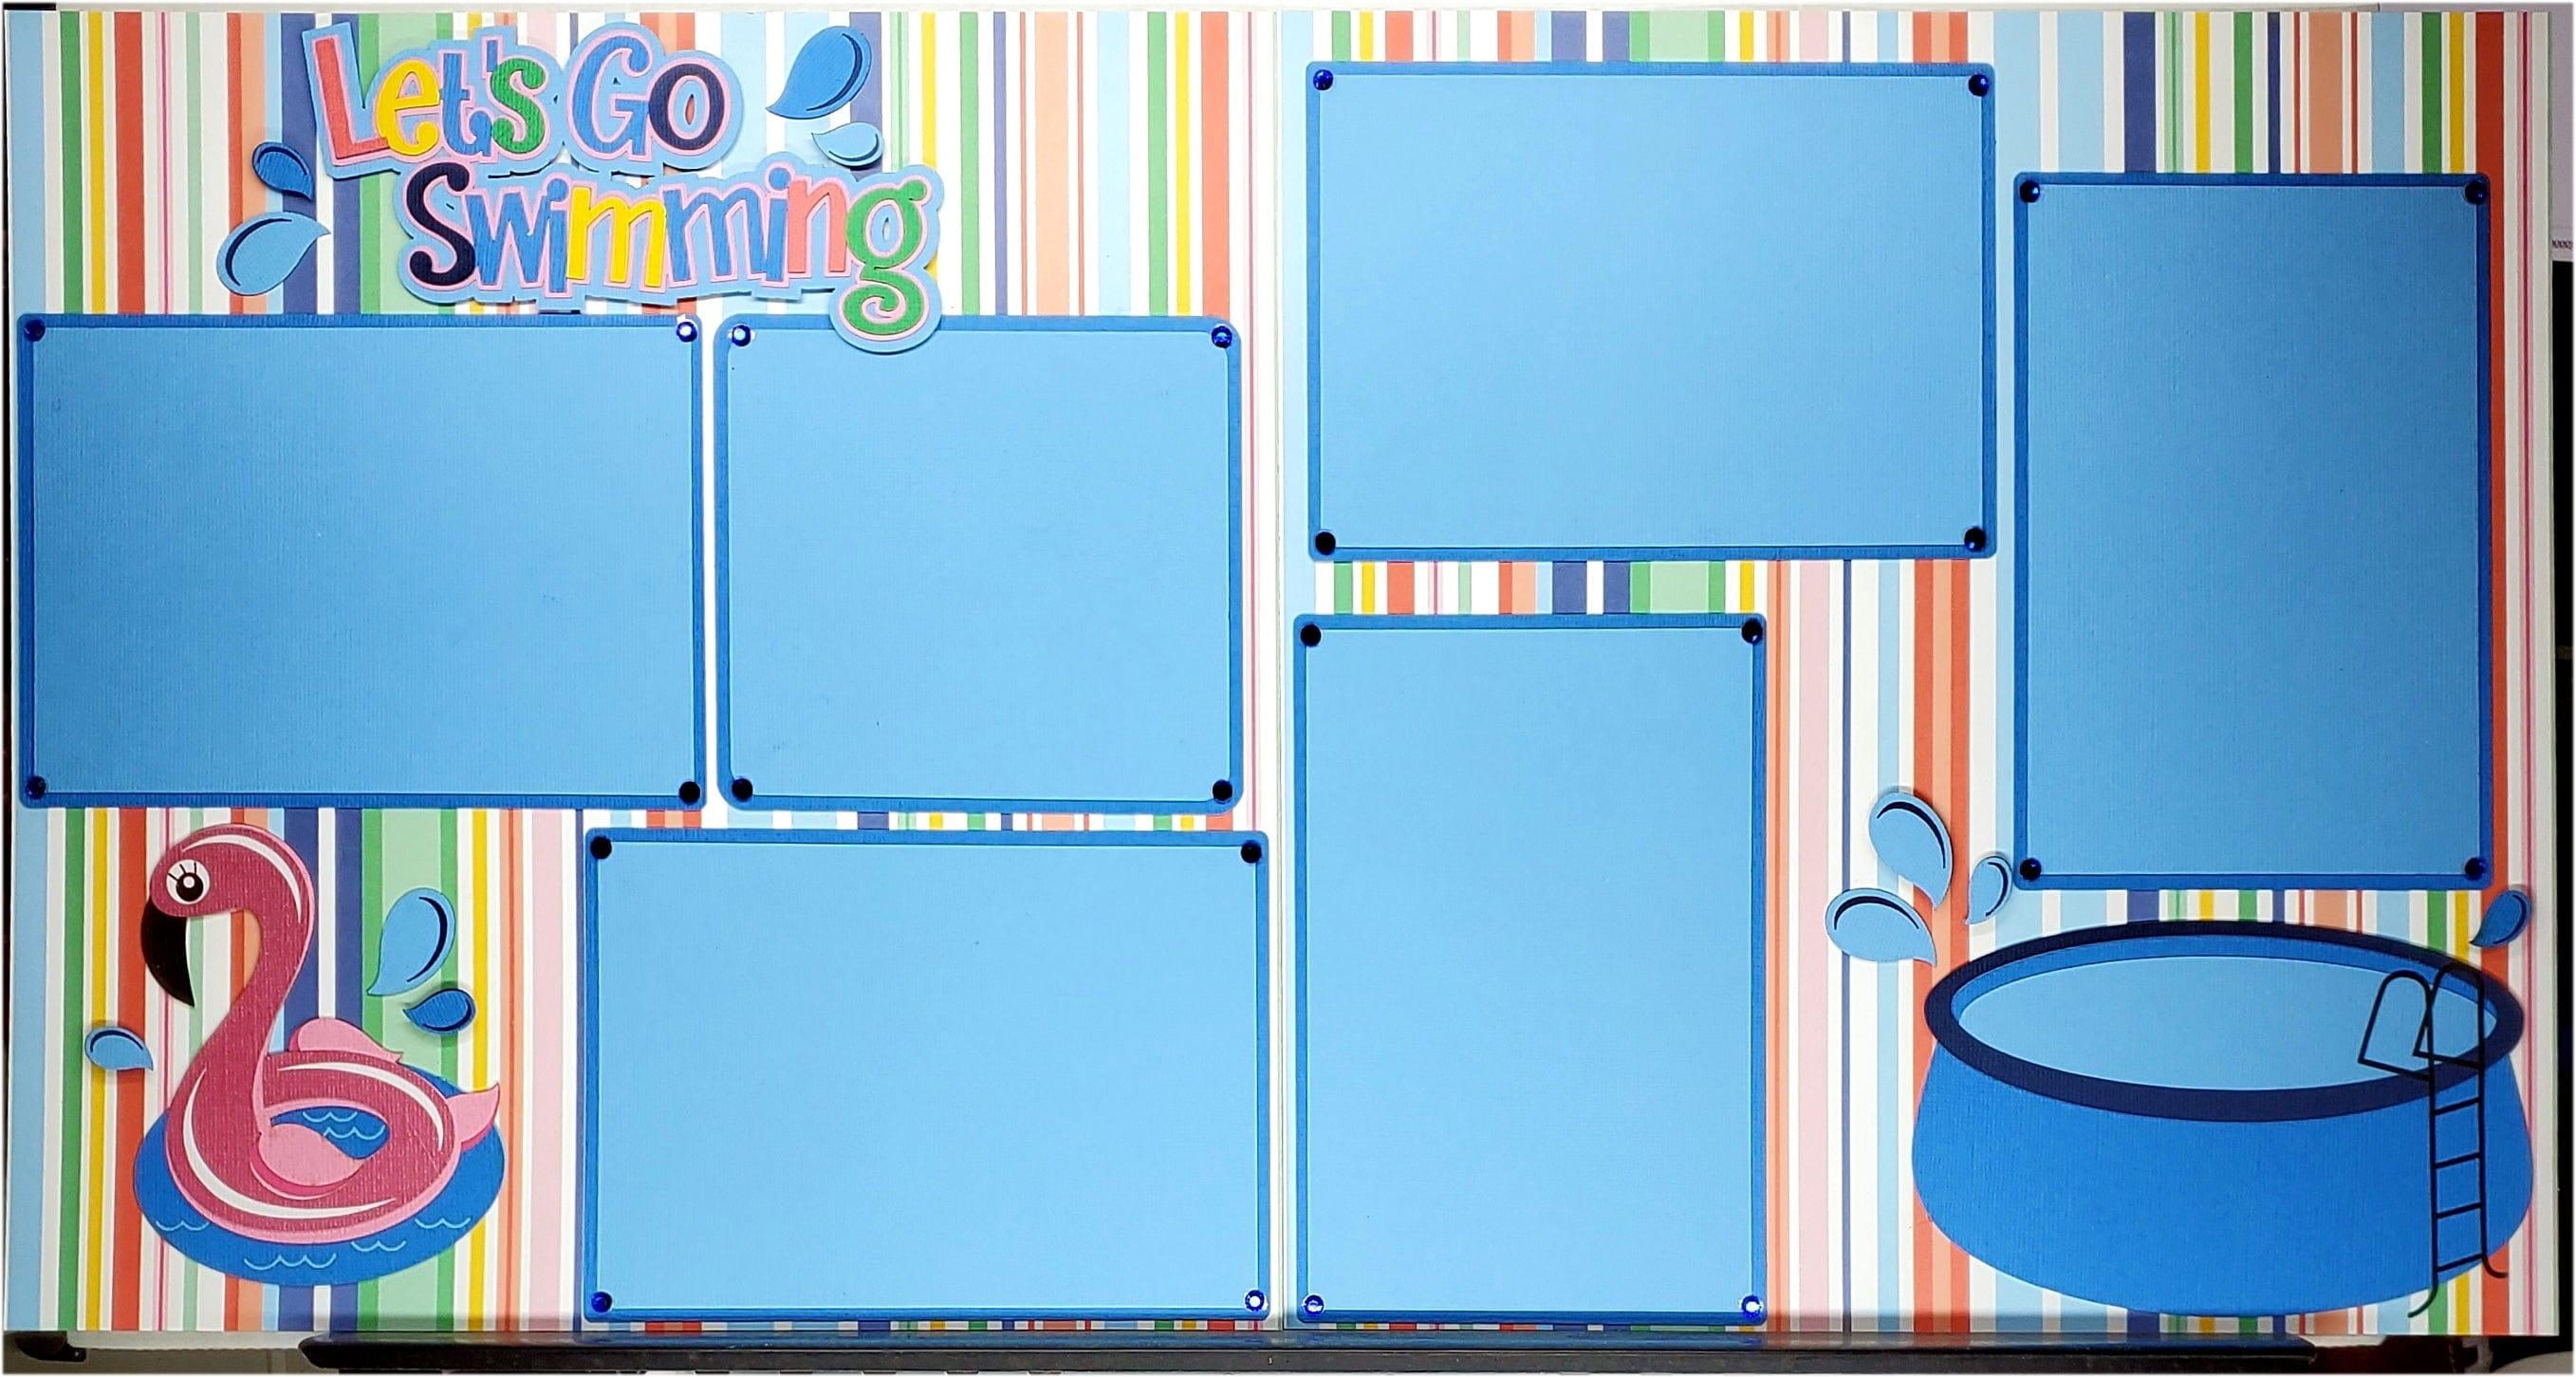 Let's Go Swimming, Pool & Flamingo Float (2) - 12 x 12 Pages, Fully-Assembled & Hand-Crafted 3D Scrapbook Premade by SSC Designs